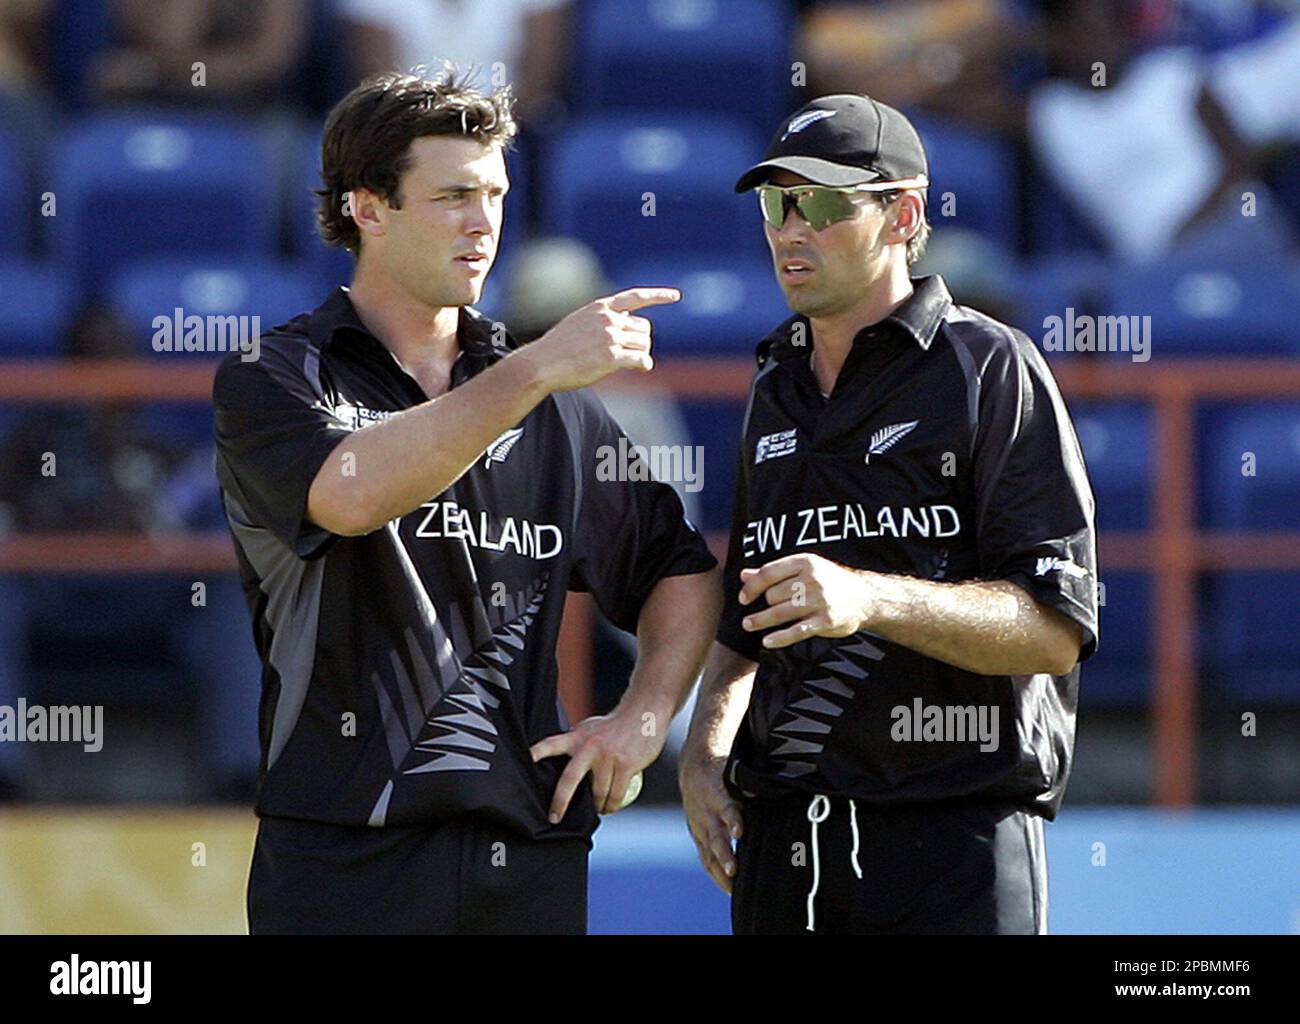 New Zealand's Stephen Fleming, right and James Franklin converse during the  Super Eight Cricket World Cup match in St. George's, Grenada, Thursday  April 12, 2007. (AP Photo/Aman Sharma Stock Photo - Alamy